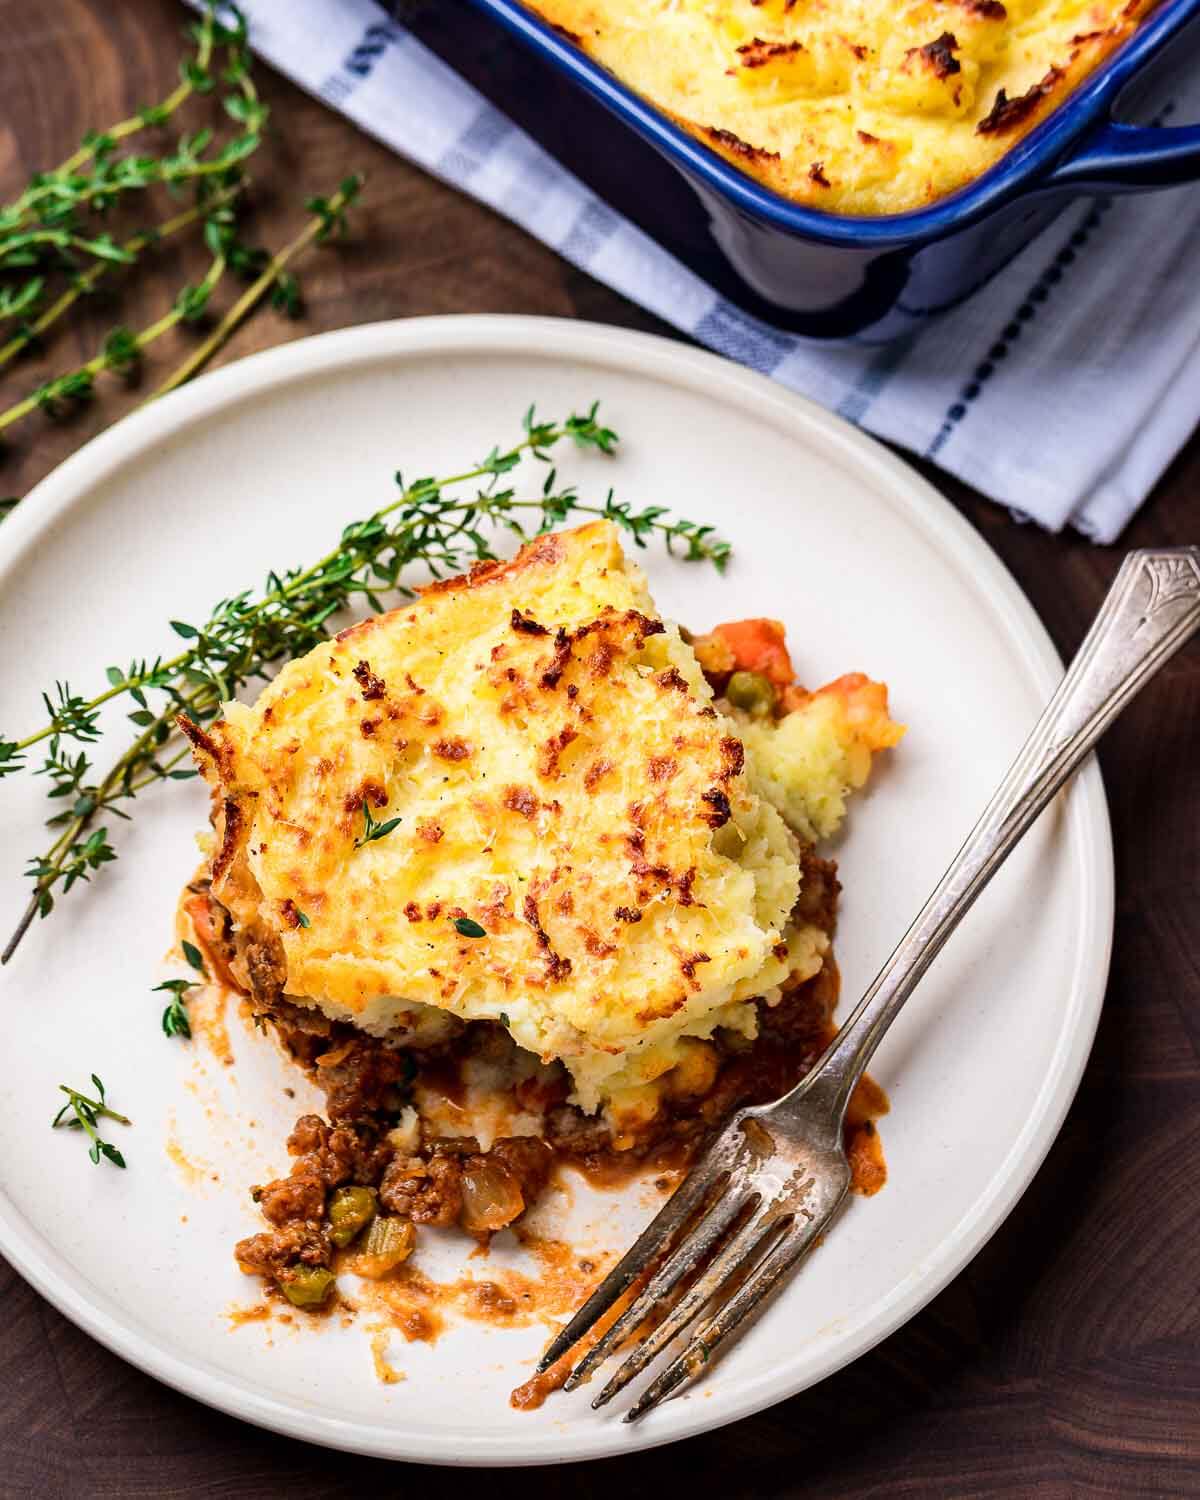 Shepherd's pie in white dish with baking dish in the background.